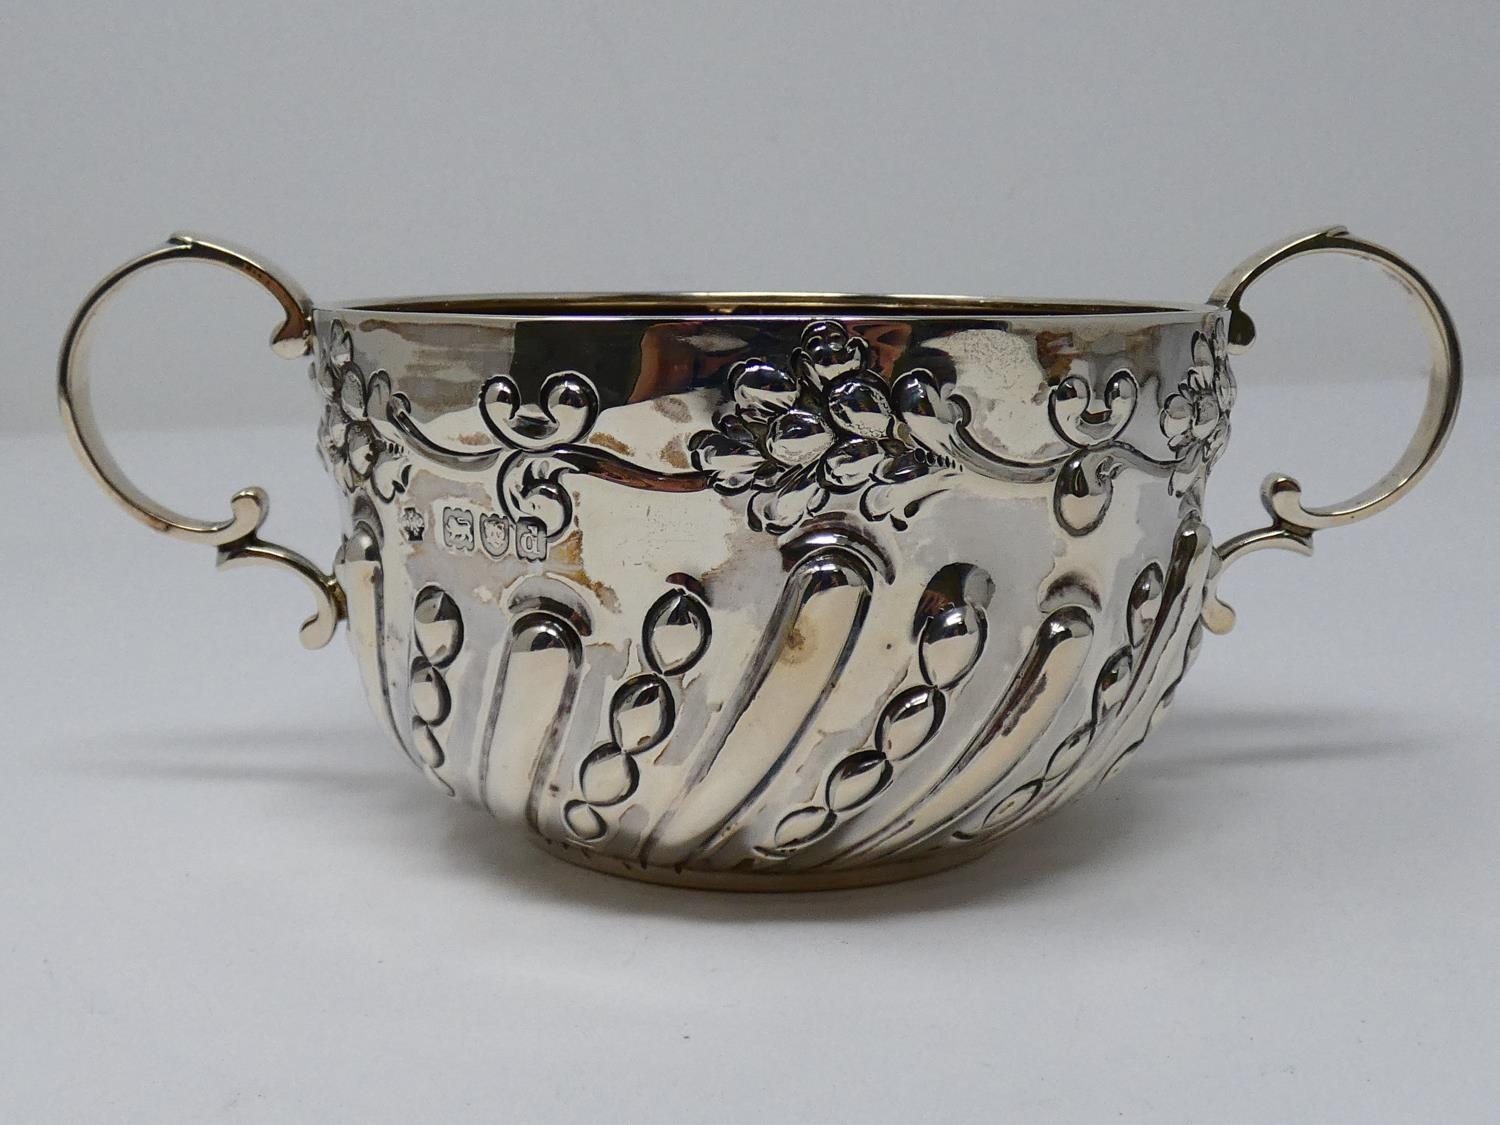 A two handled Victorian repousse design silver porriger with floral design and scrolling handles. - Image 2 of 6